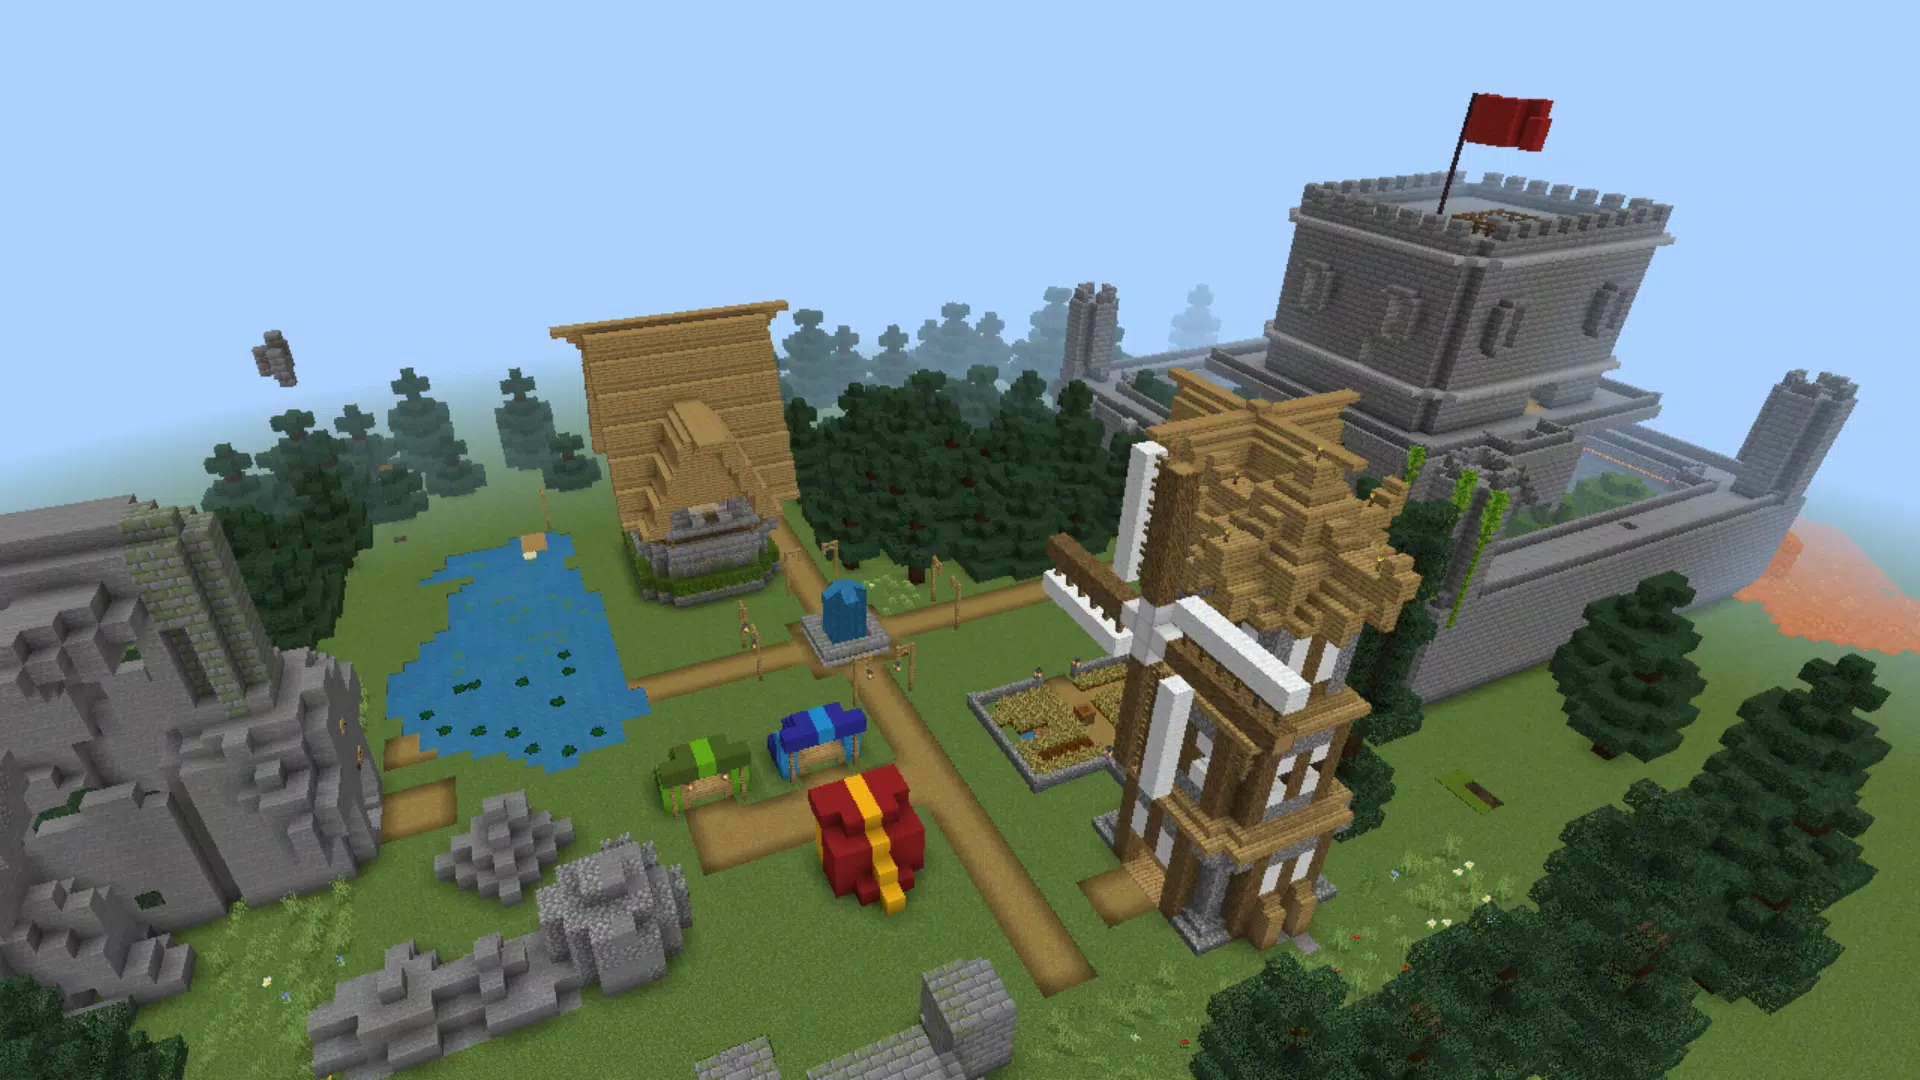 Hide and Seek Maps Minecraft - Apps on Google Play